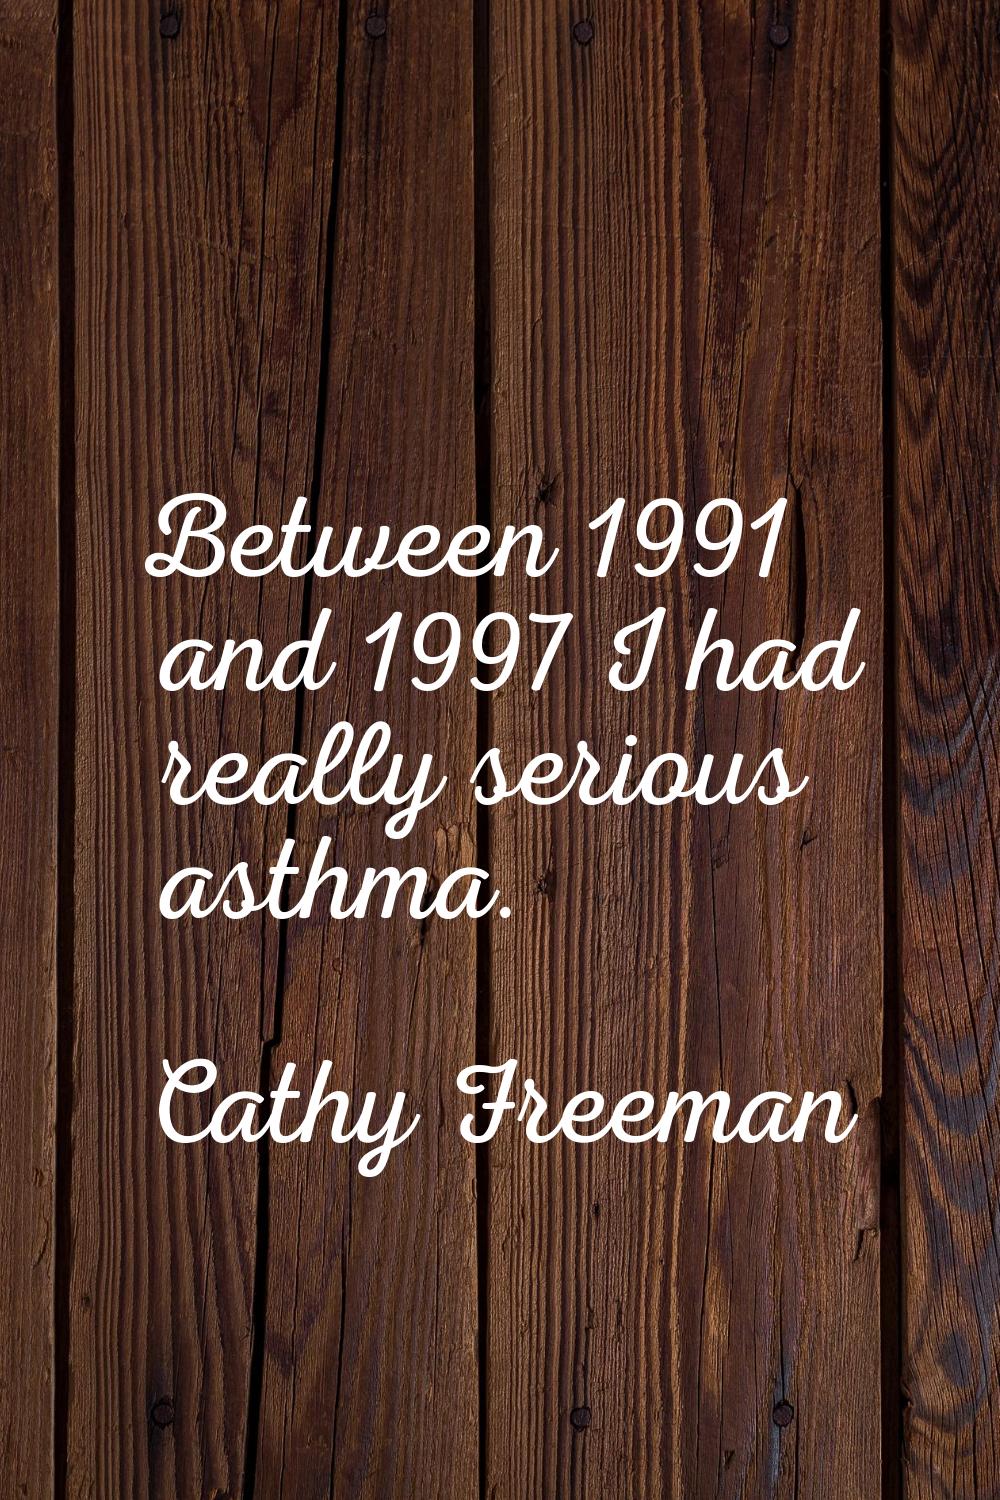 Between 1991 and 1997 I had really serious asthma.